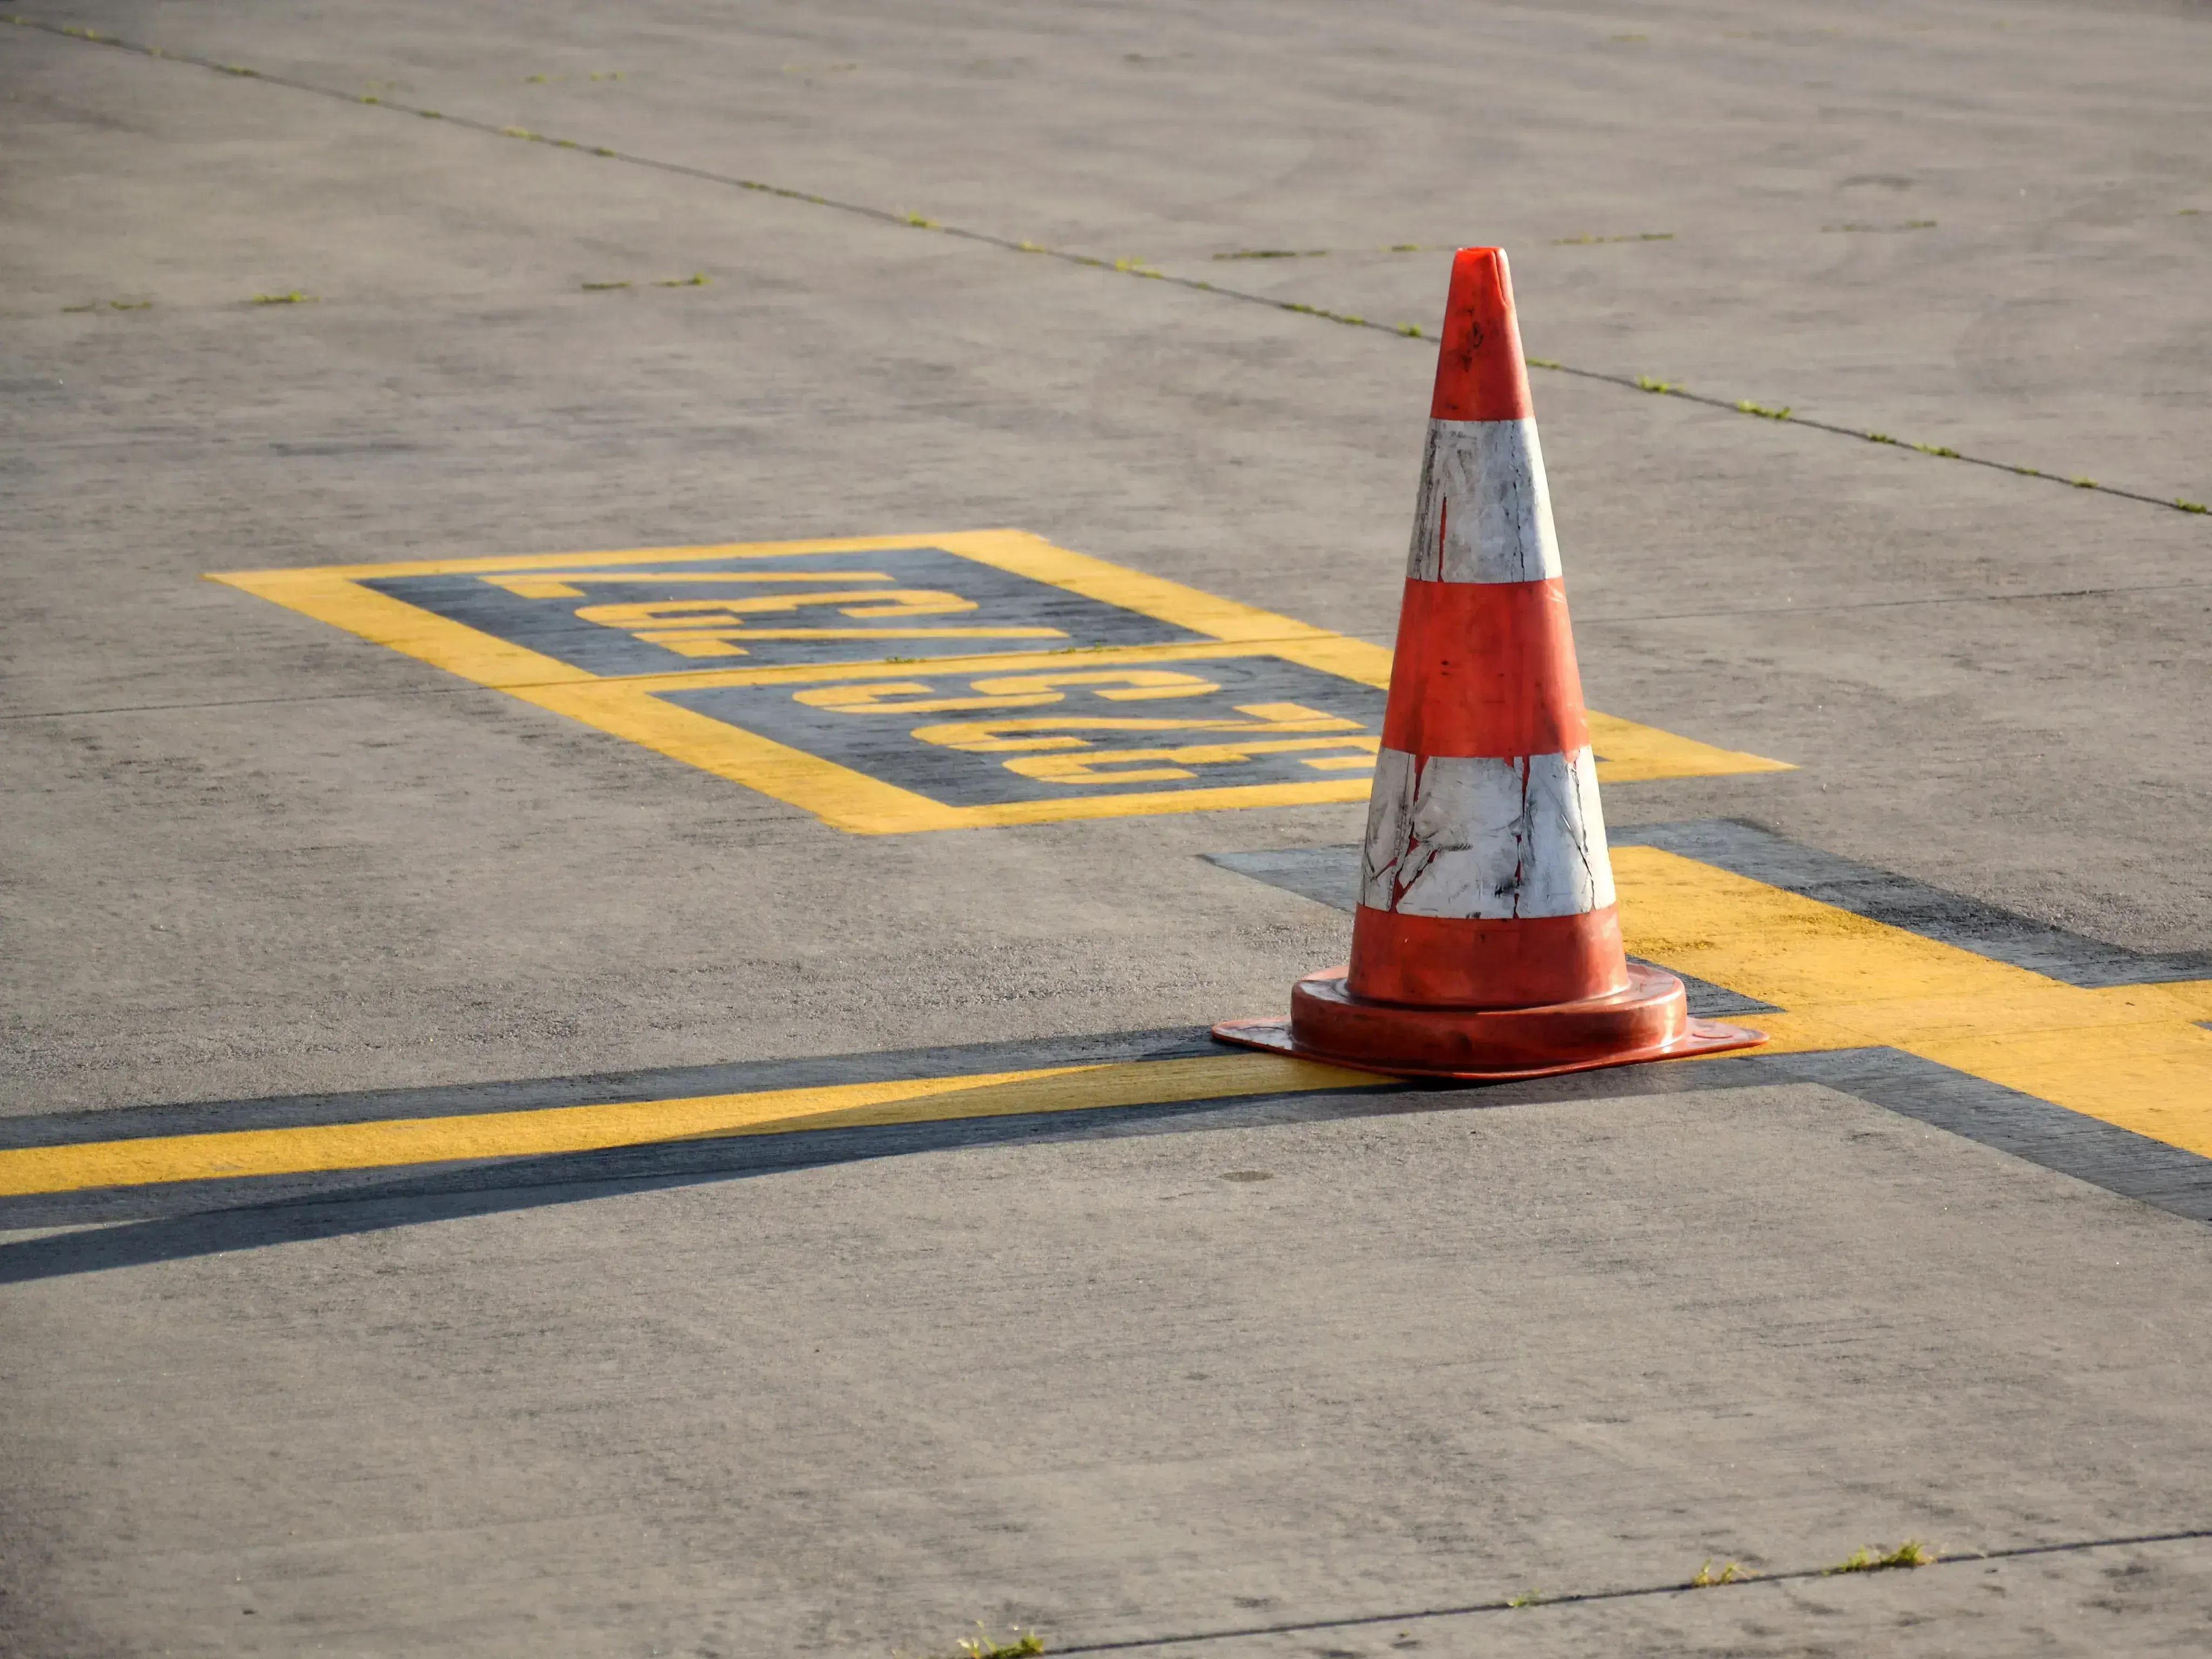 A traffic cone standing on a runway